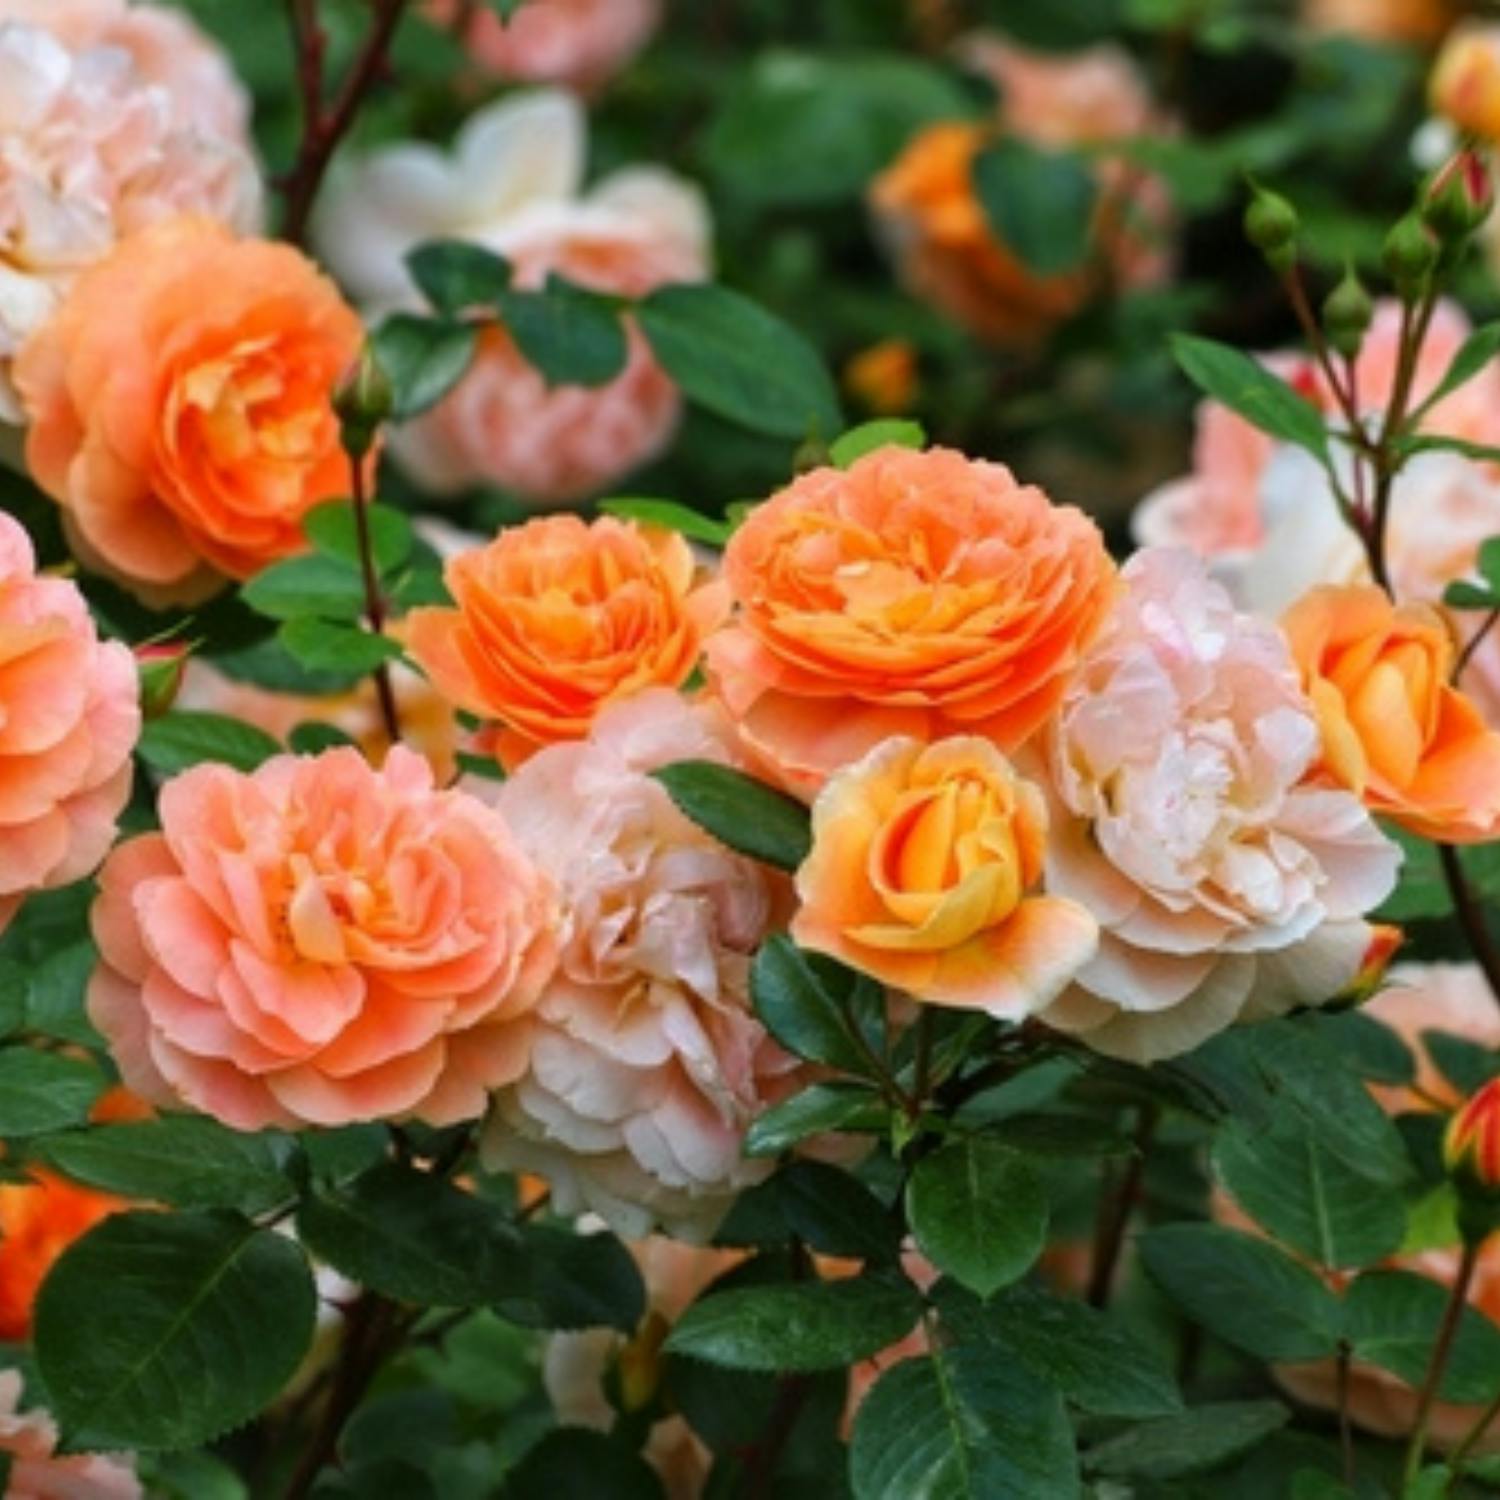 Gardening: Taking care of your roses